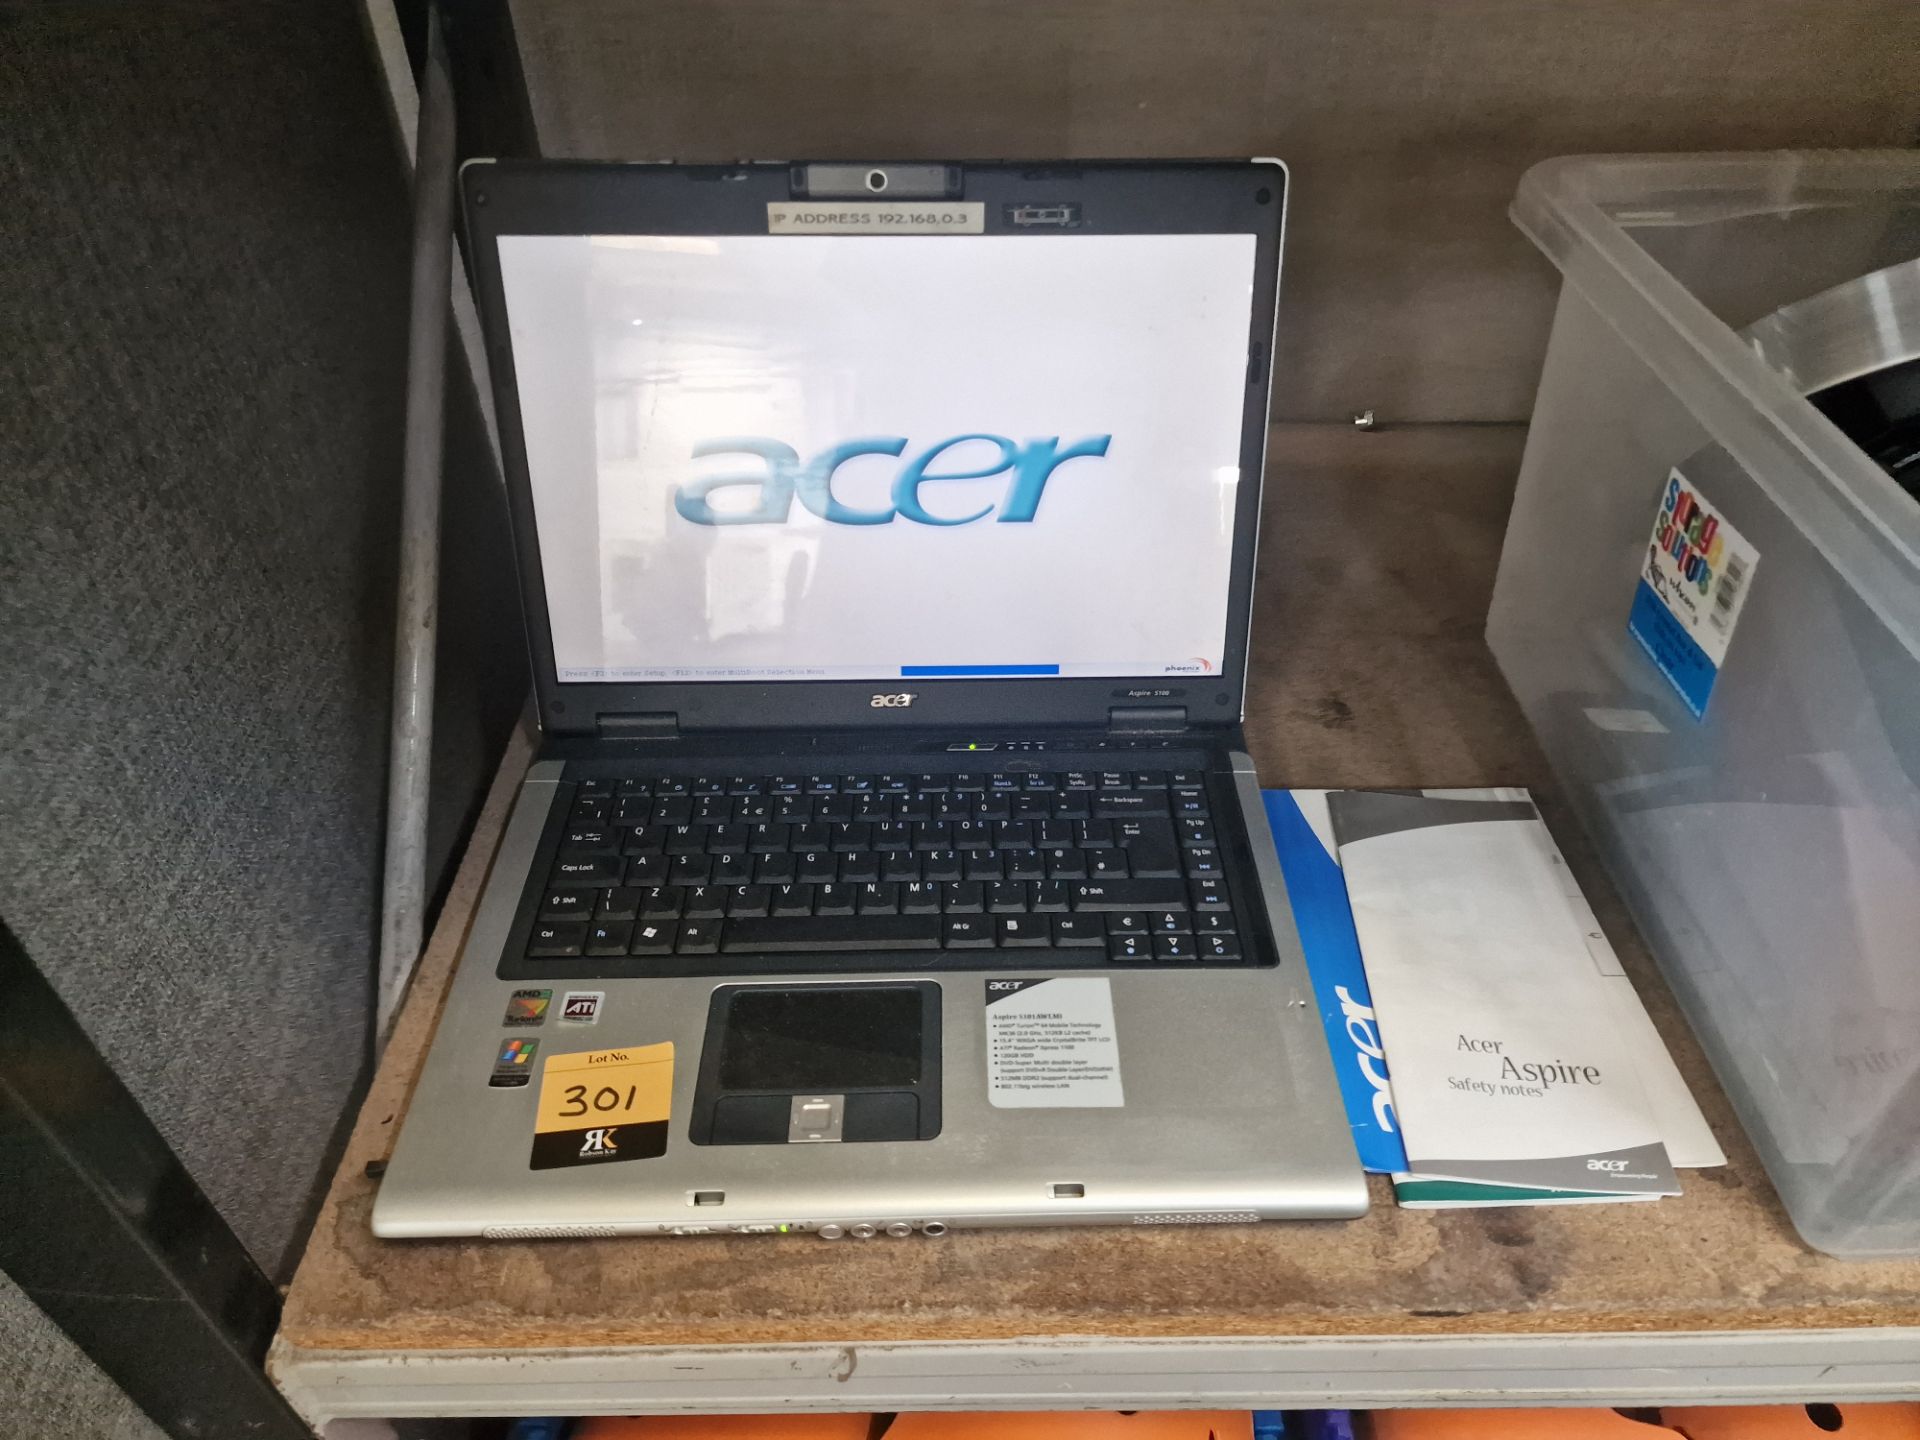 Acer Aspire 5100 notebook computer including power pack/charger